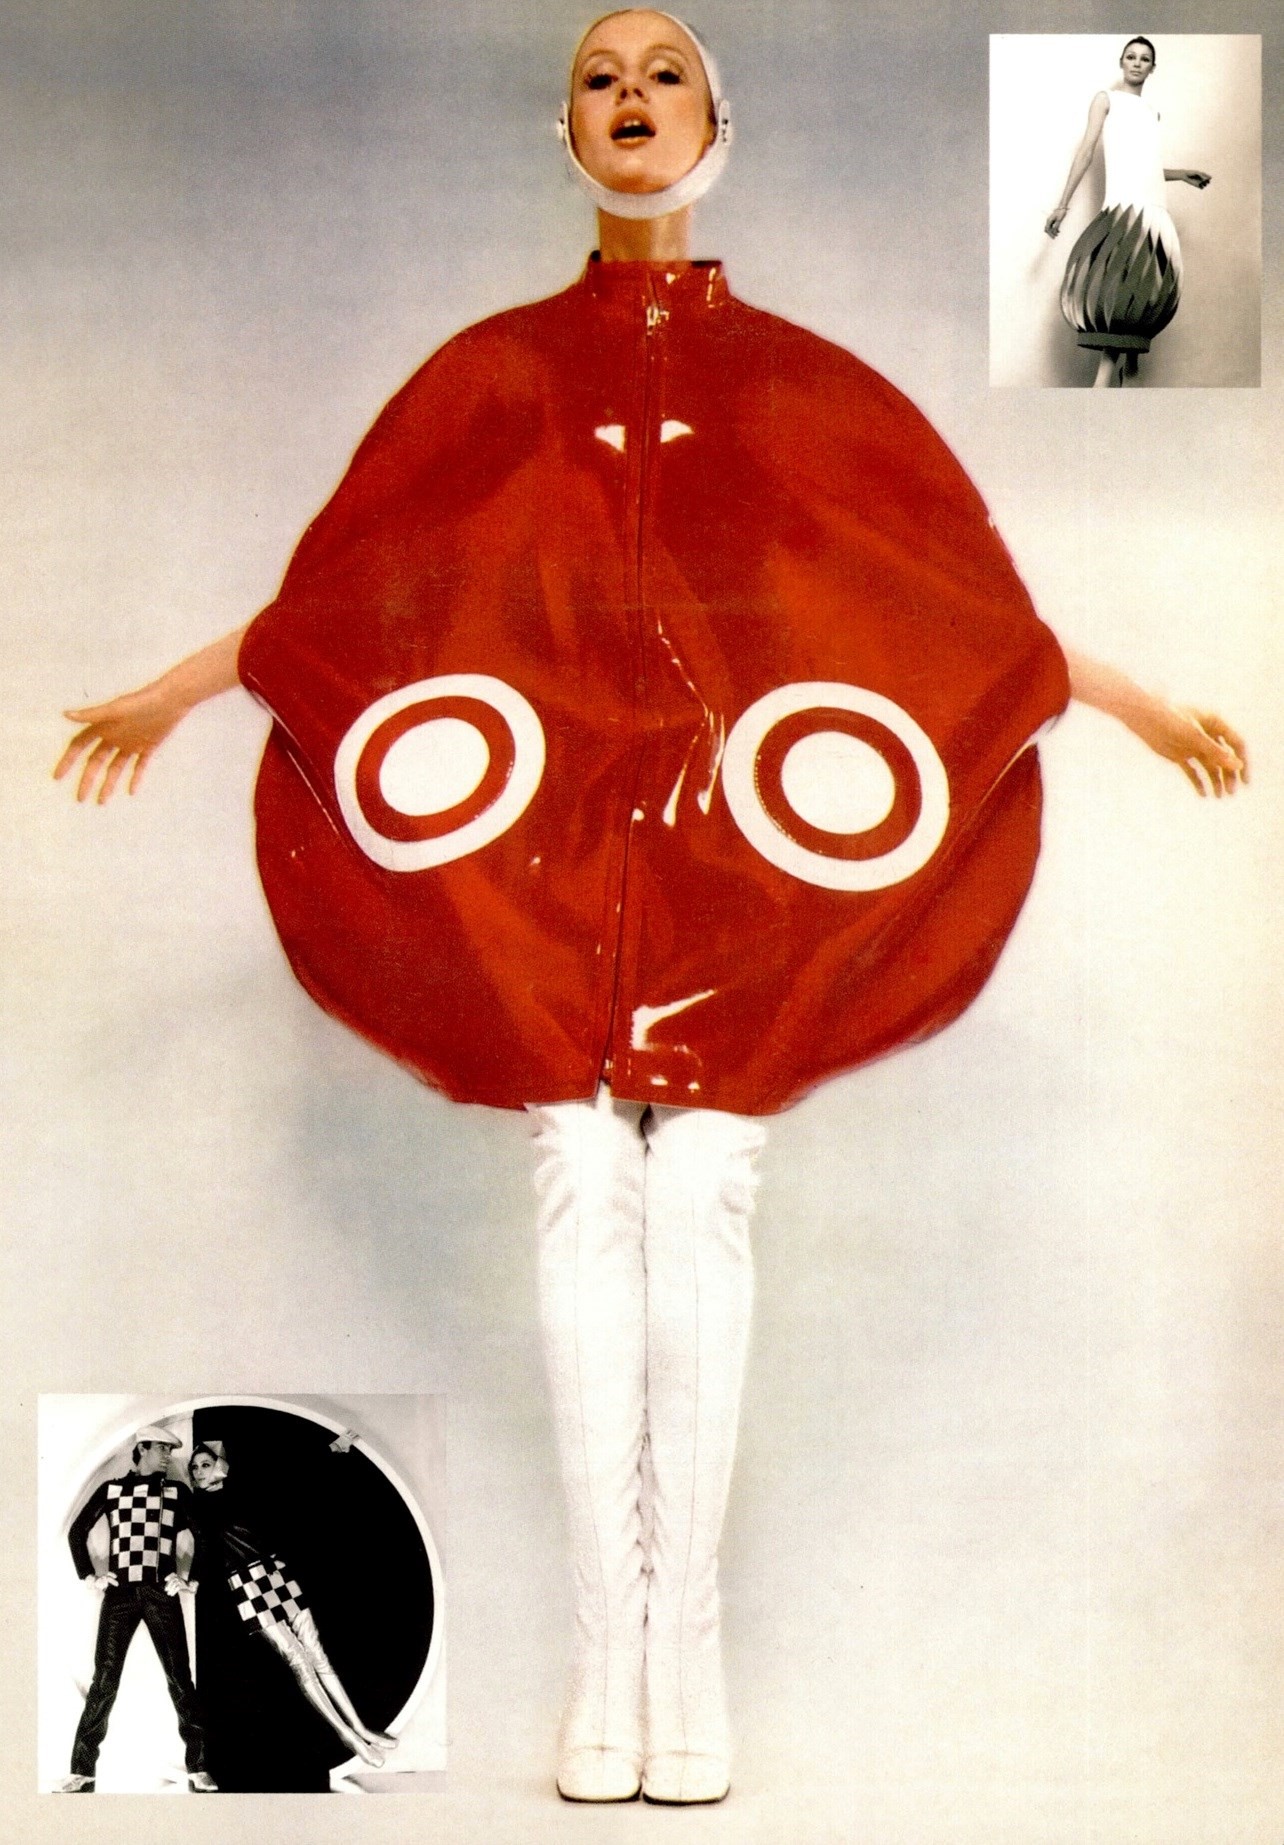 Pierre Cardin, the man who dressed the future